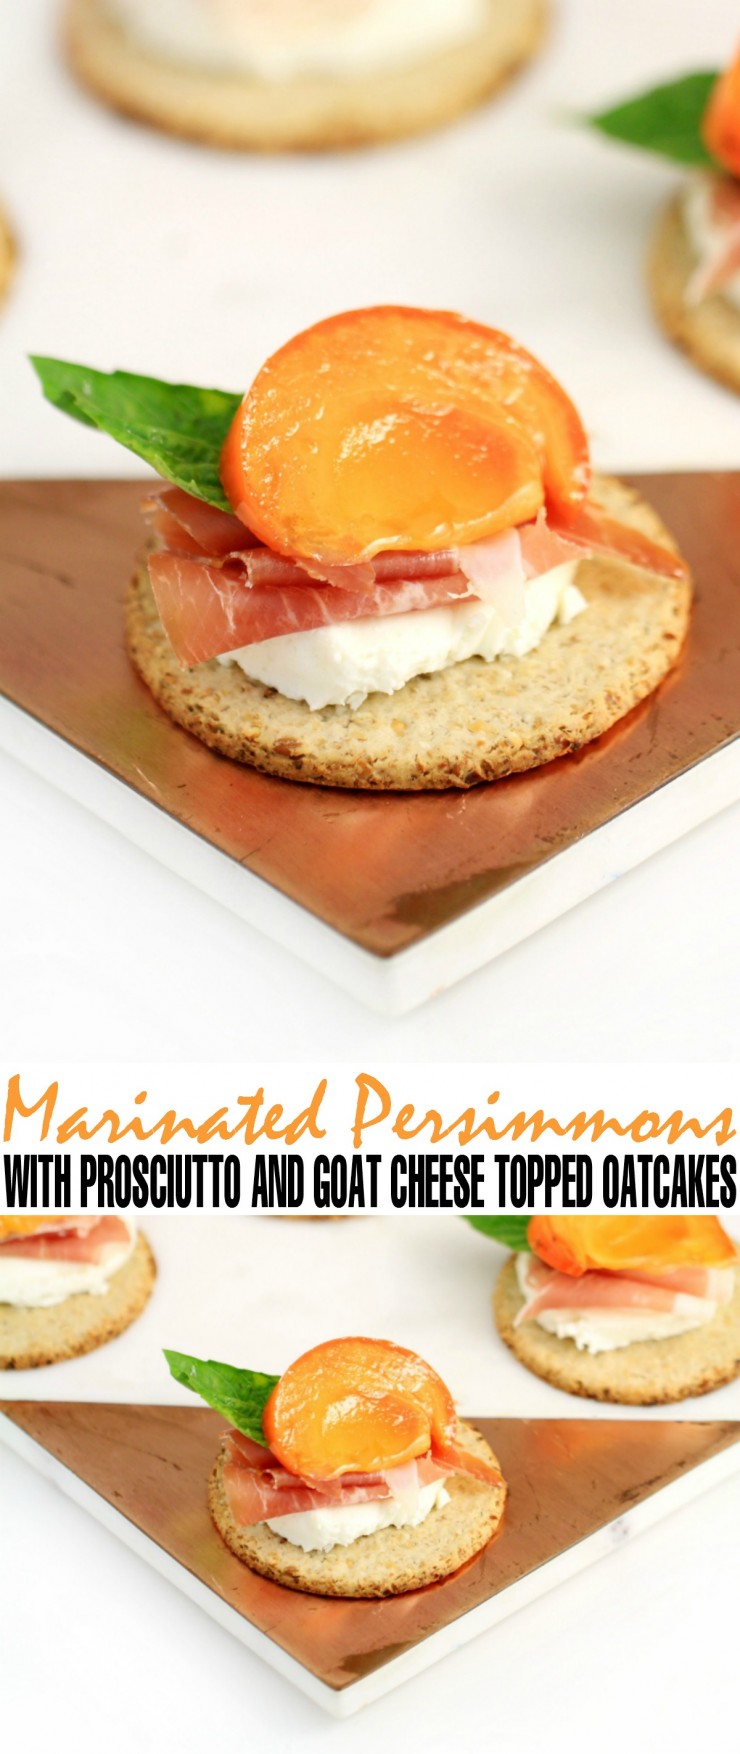 Marinated Persimmon with Prosciutto and Goat Cheese Topped Oatcakes make for a stunning and delicious holiday appetizer. Perfect for Christmas dinner parties or Thanksgiving dinner, your guests will be delighted with the flavour of these hors d'oeuvre .